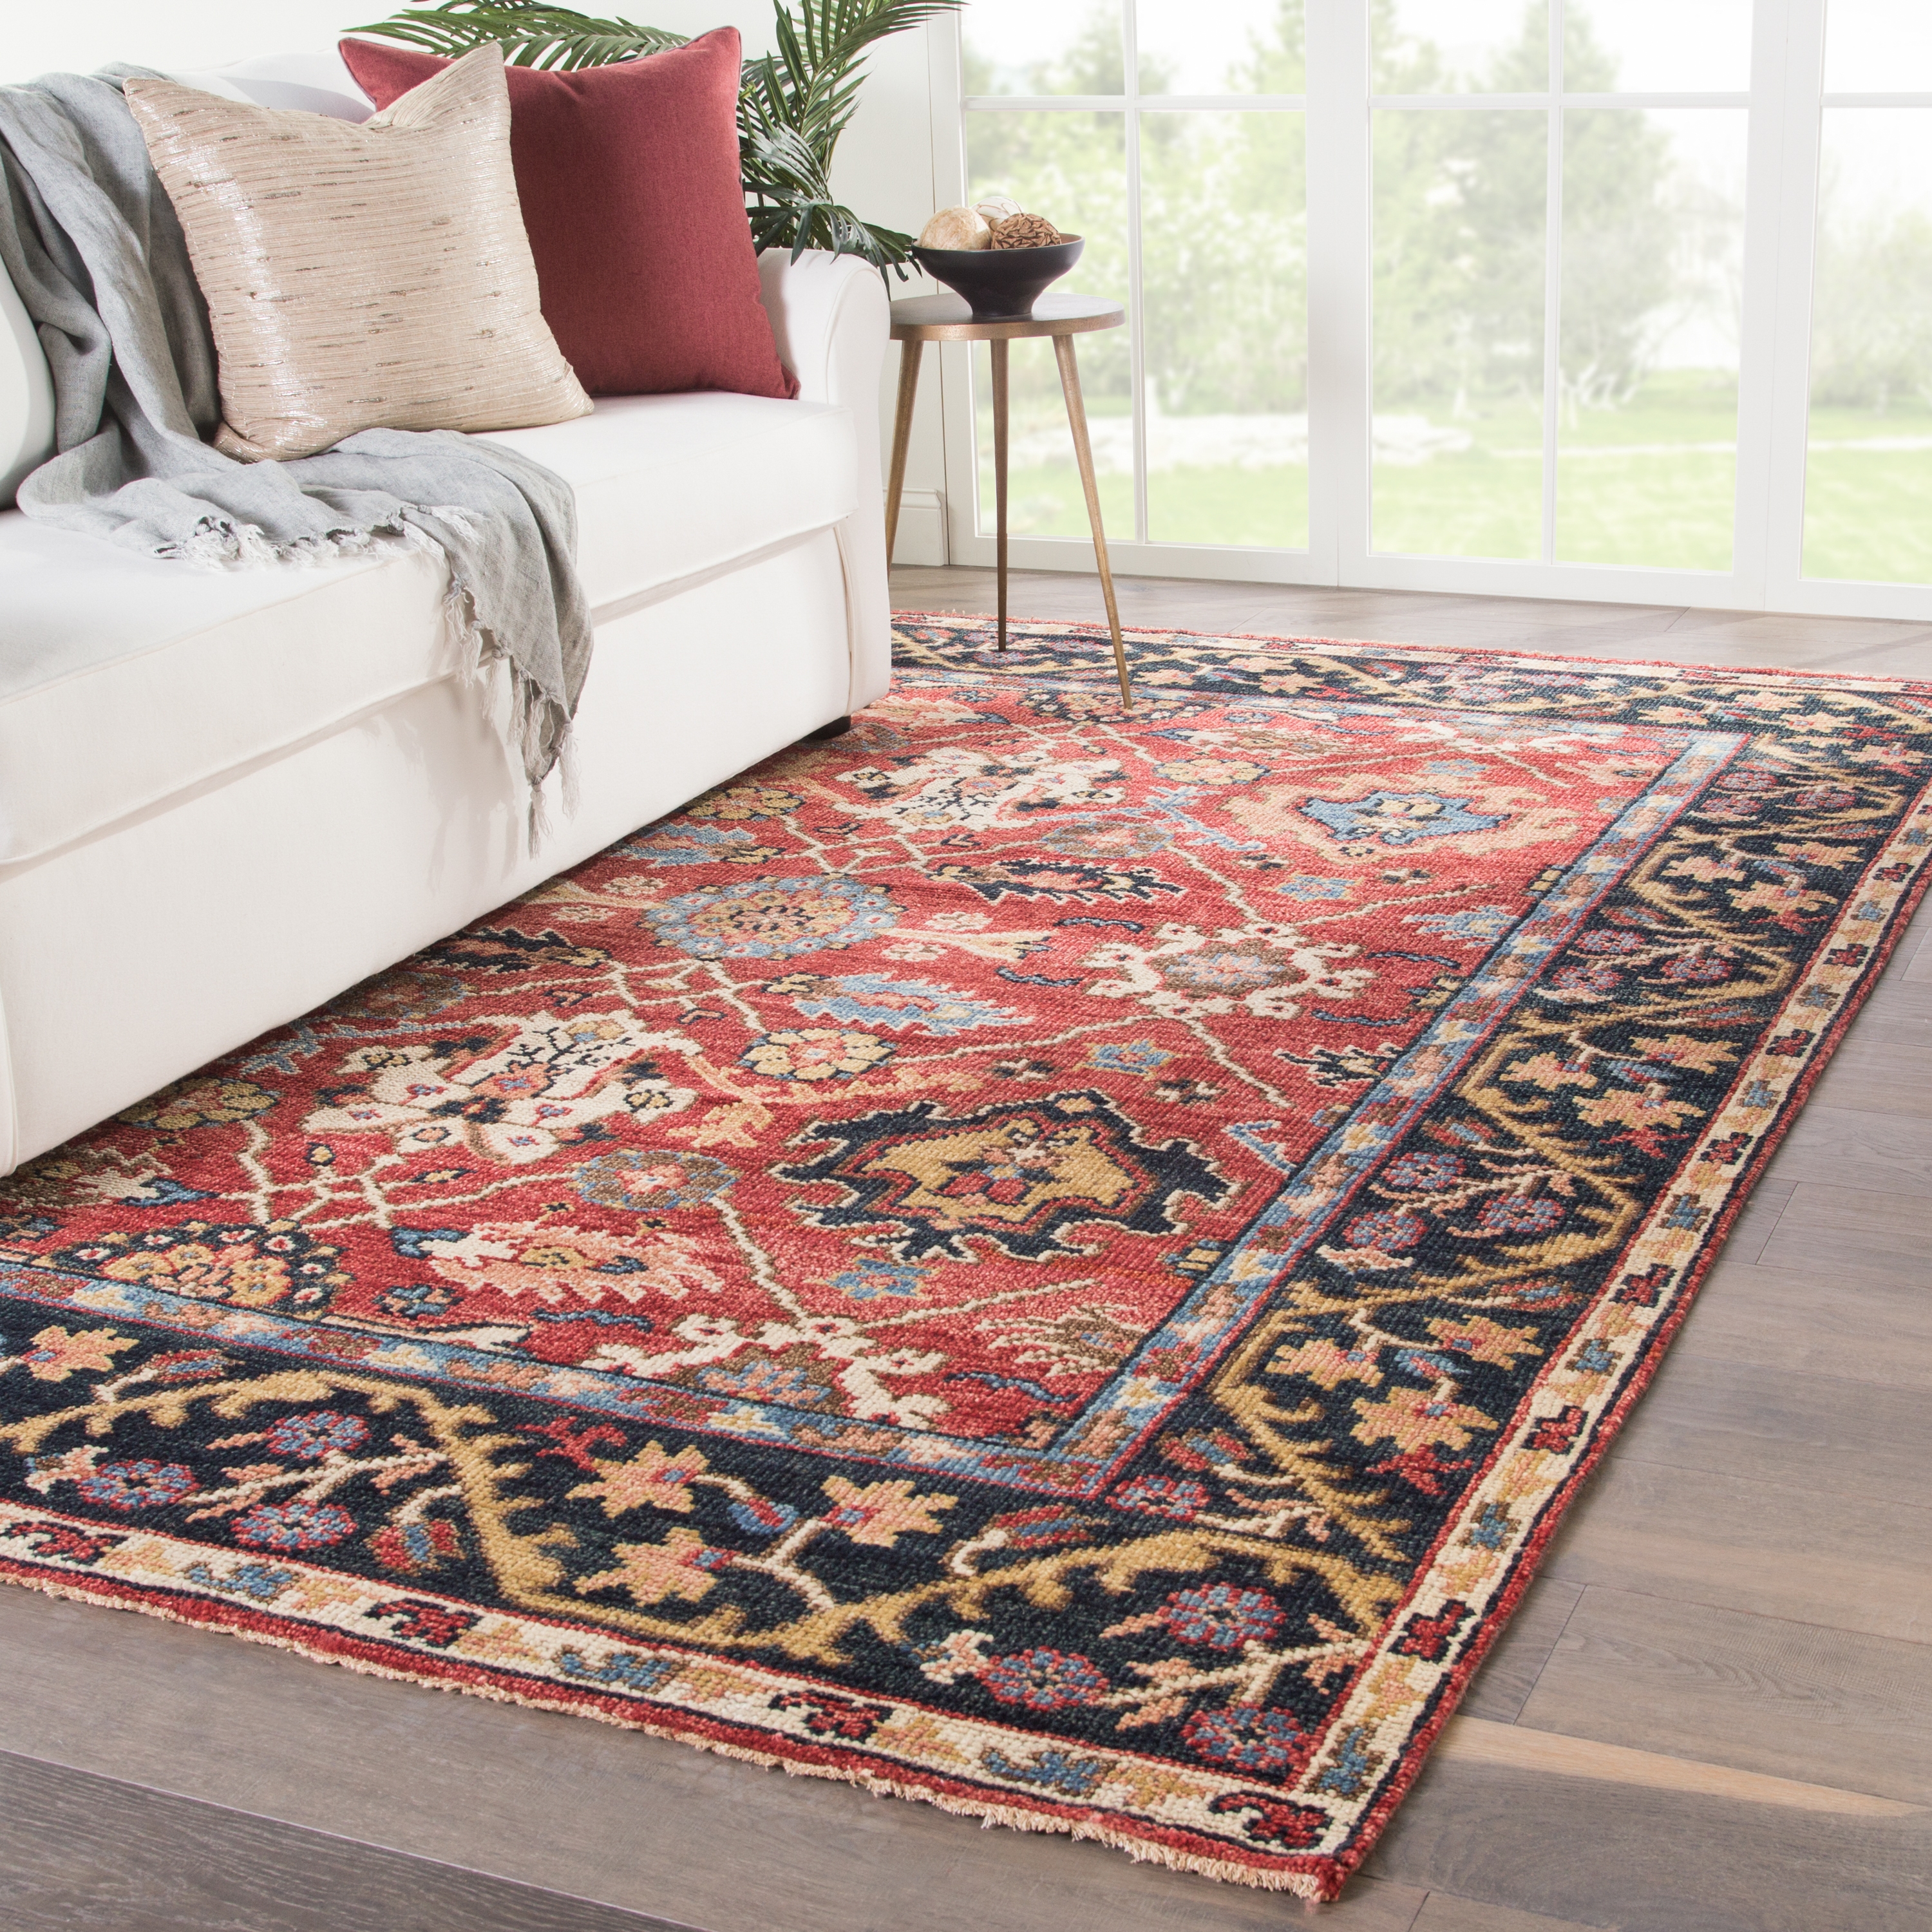 Aika Hand-Knotted Medallion Red/ Multicolor Area Rug (6'X9') - Image 4